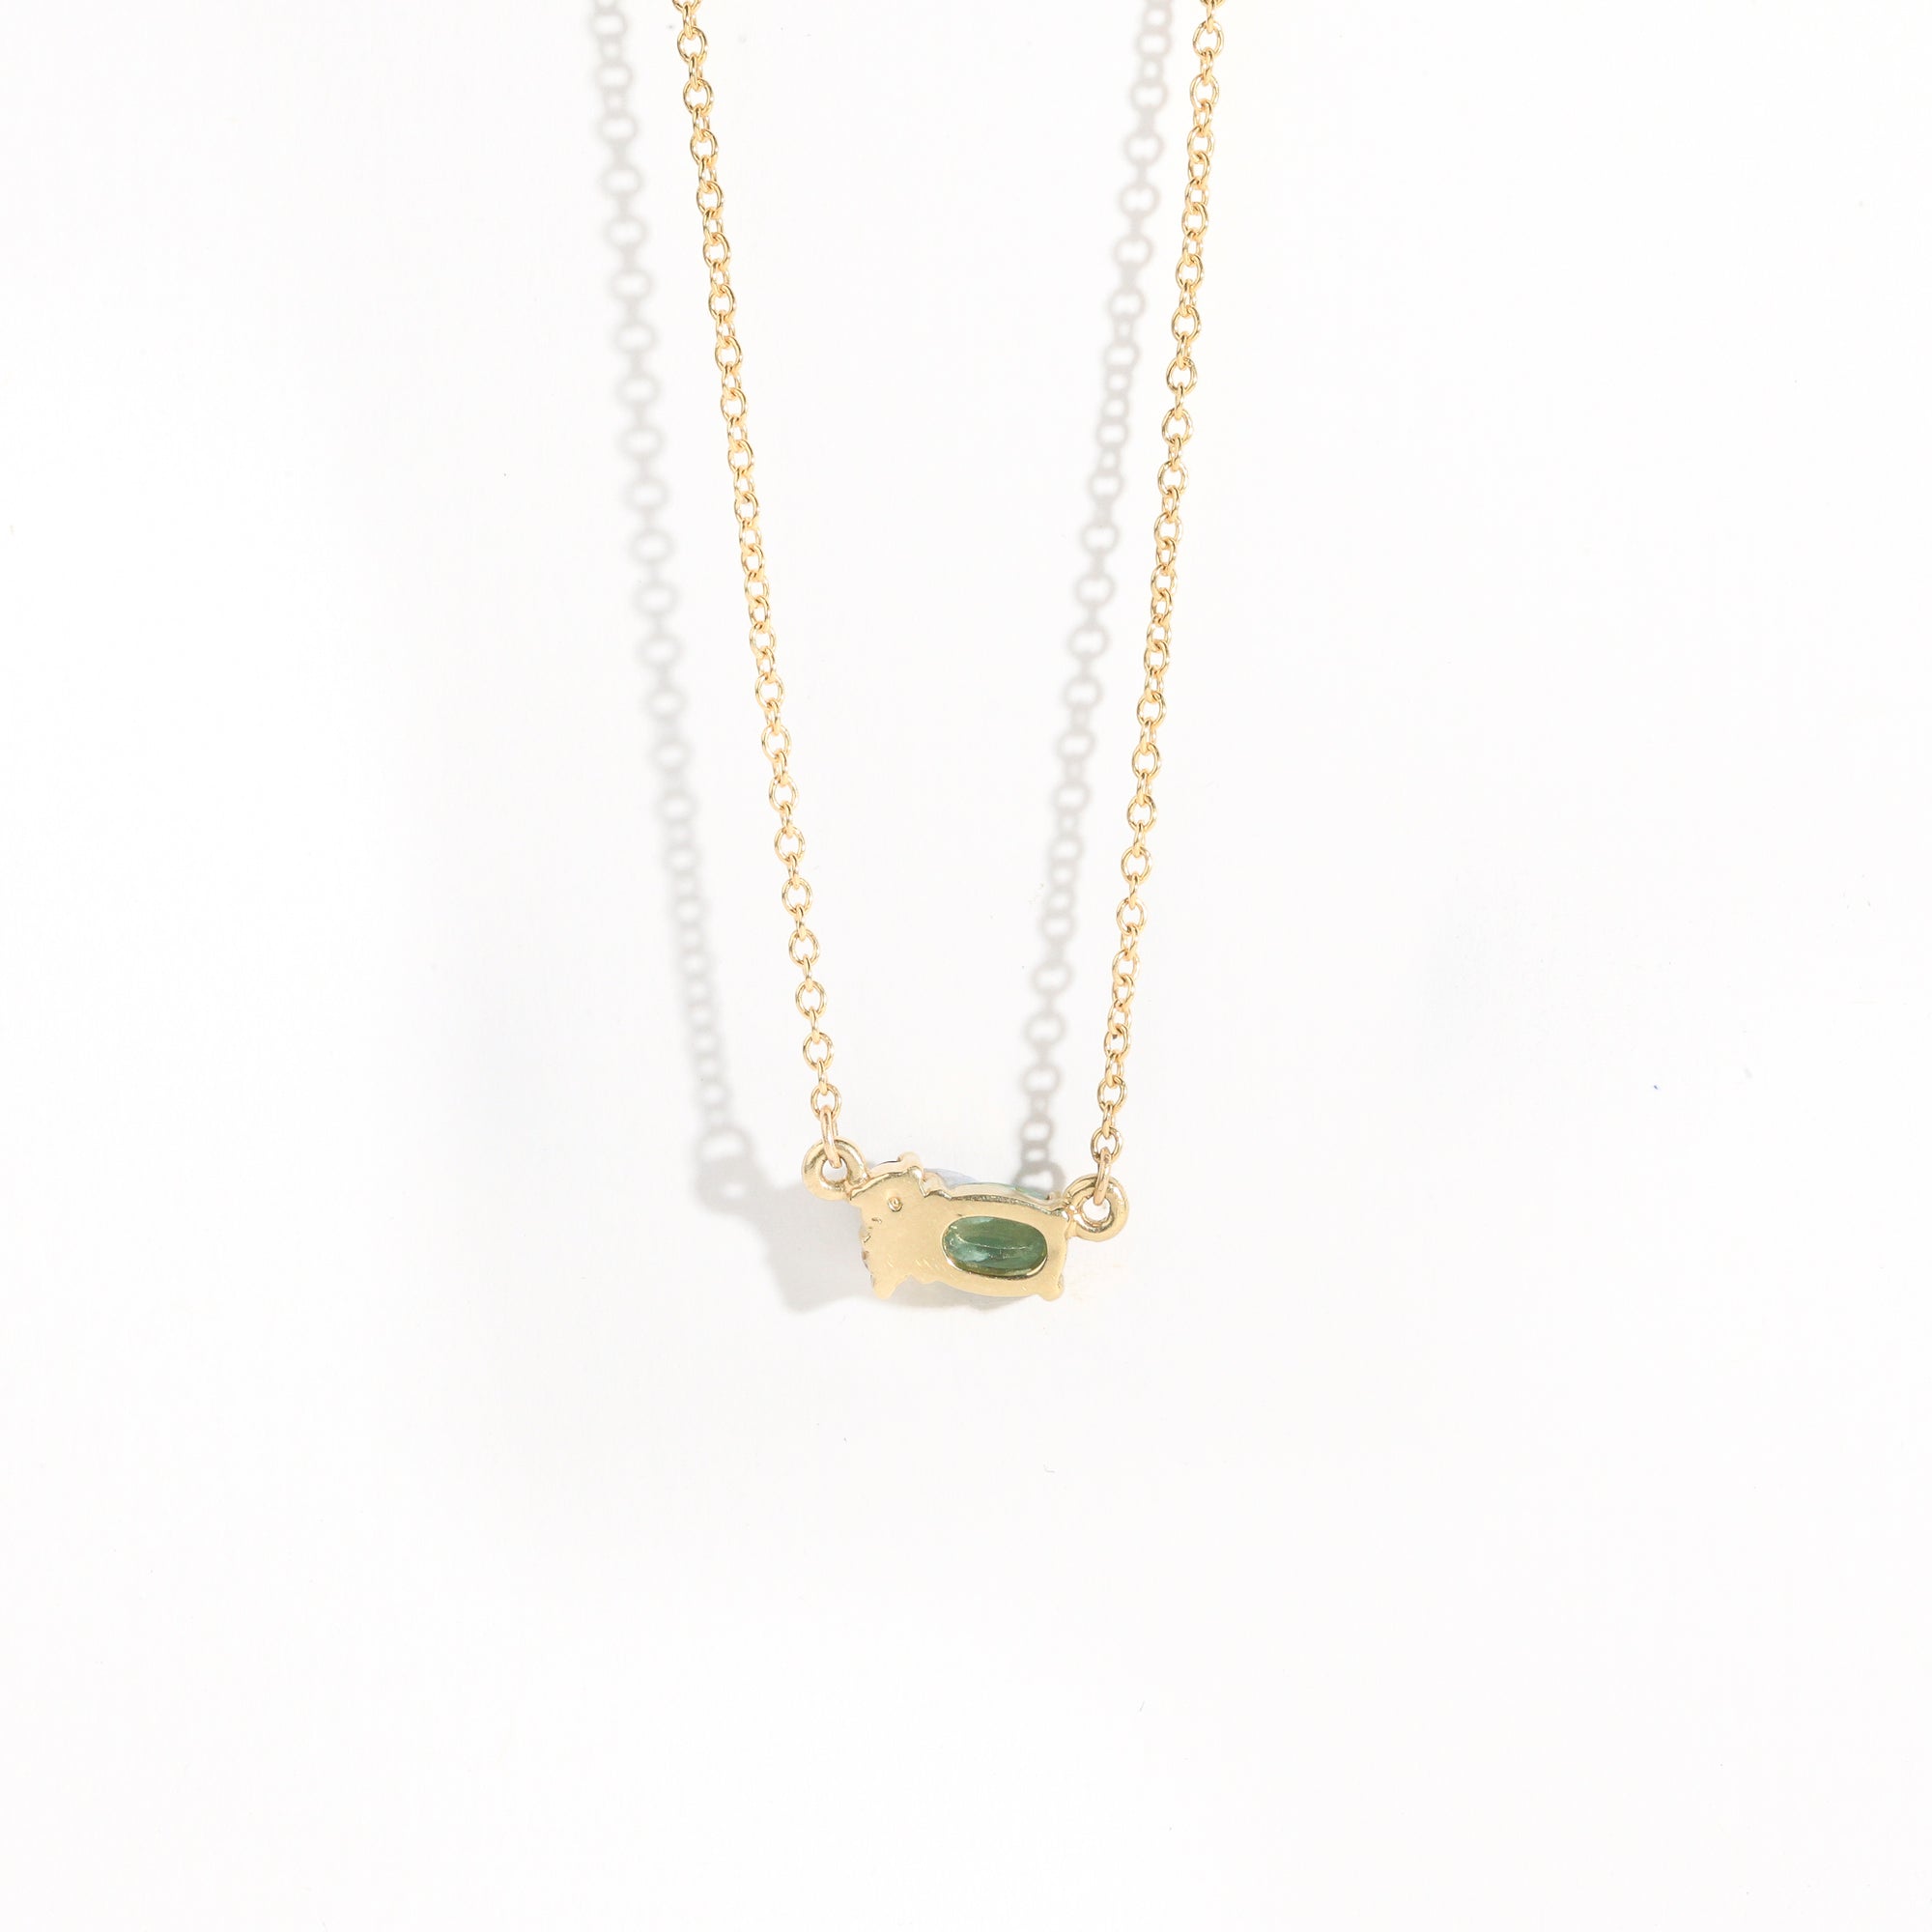 9 carat yellow gold three stone pendant, with a central green ethically sourced Australian sapphire, a deep blue round sapphire and a white diamond.